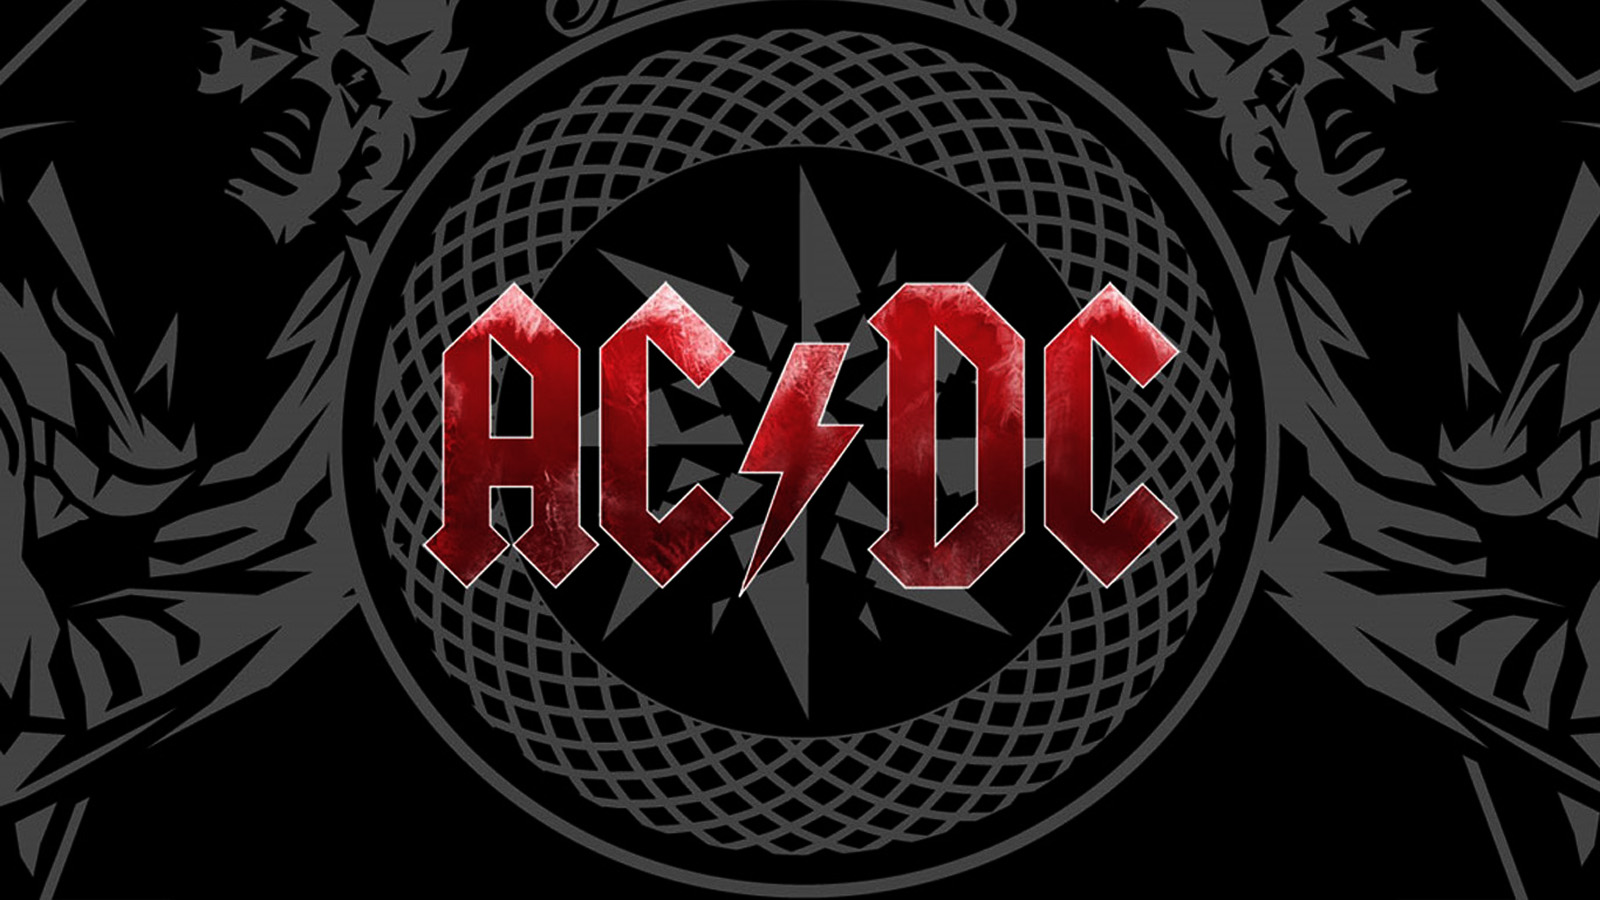 AC DC Music Band HD Wallpapers Album Covers Desktop Wallpapers